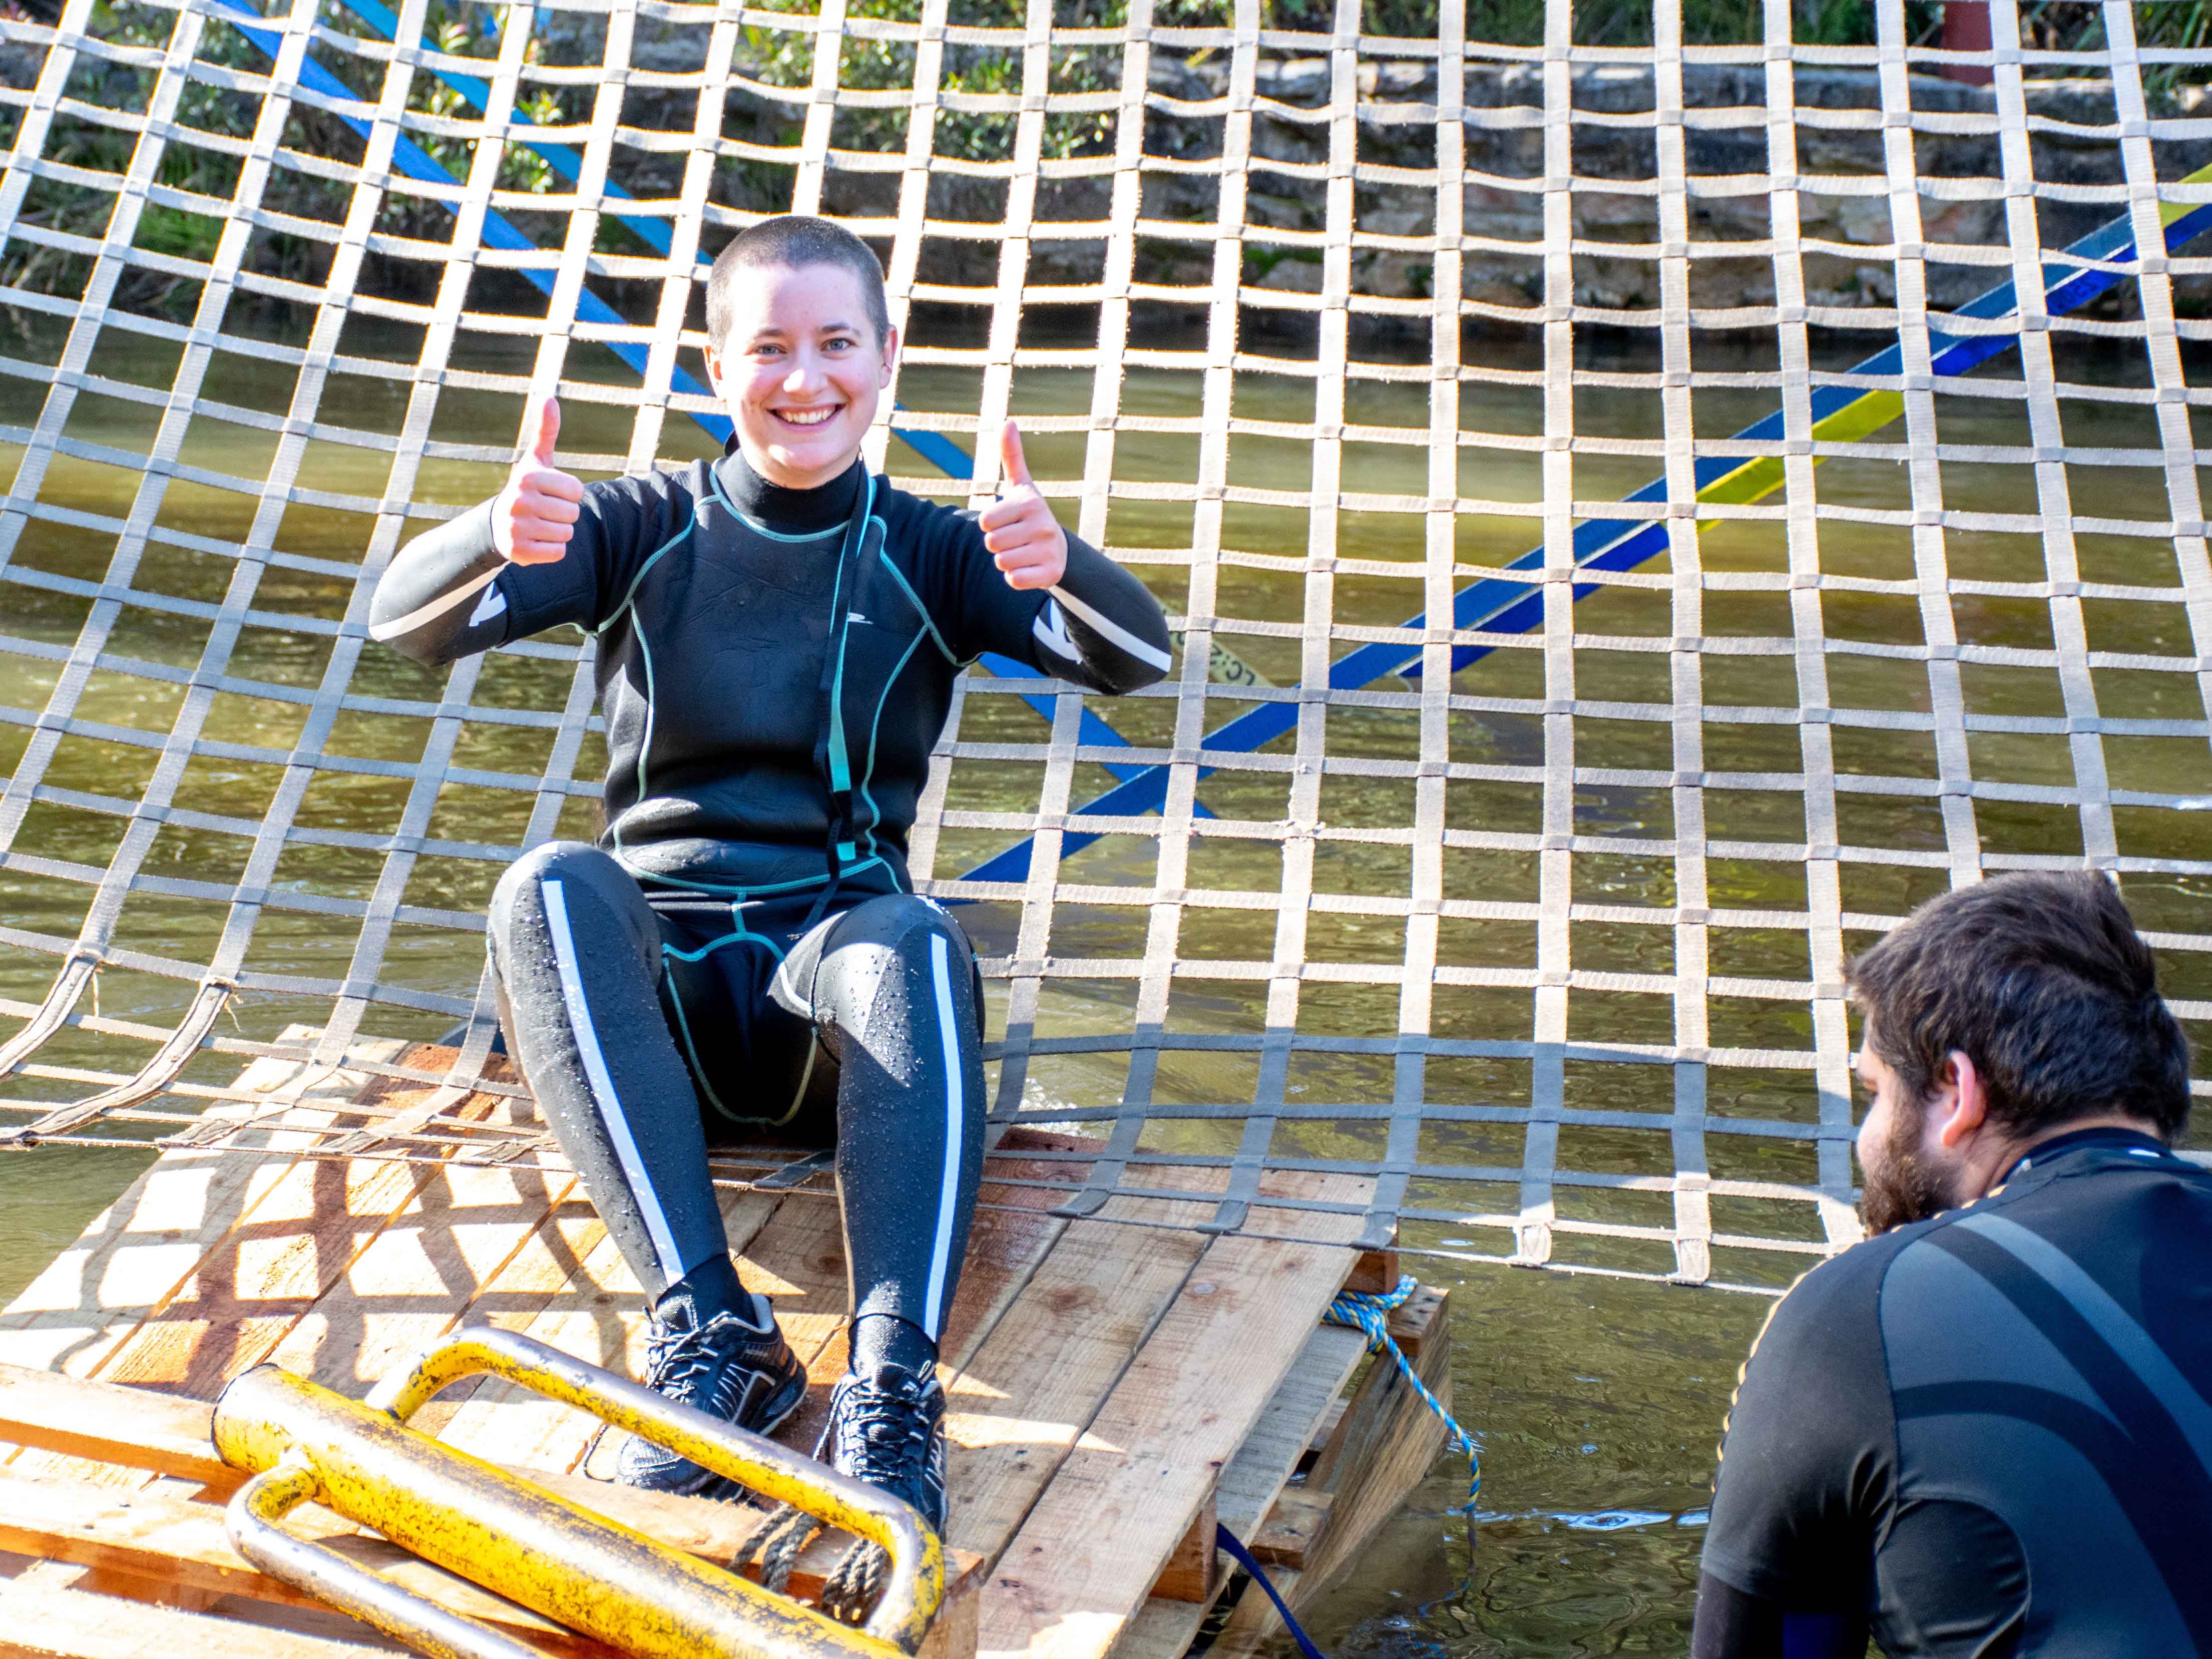 A woman smiling at the camera with her thumbs up and wearing a wetsuit and sitting on a net over water.